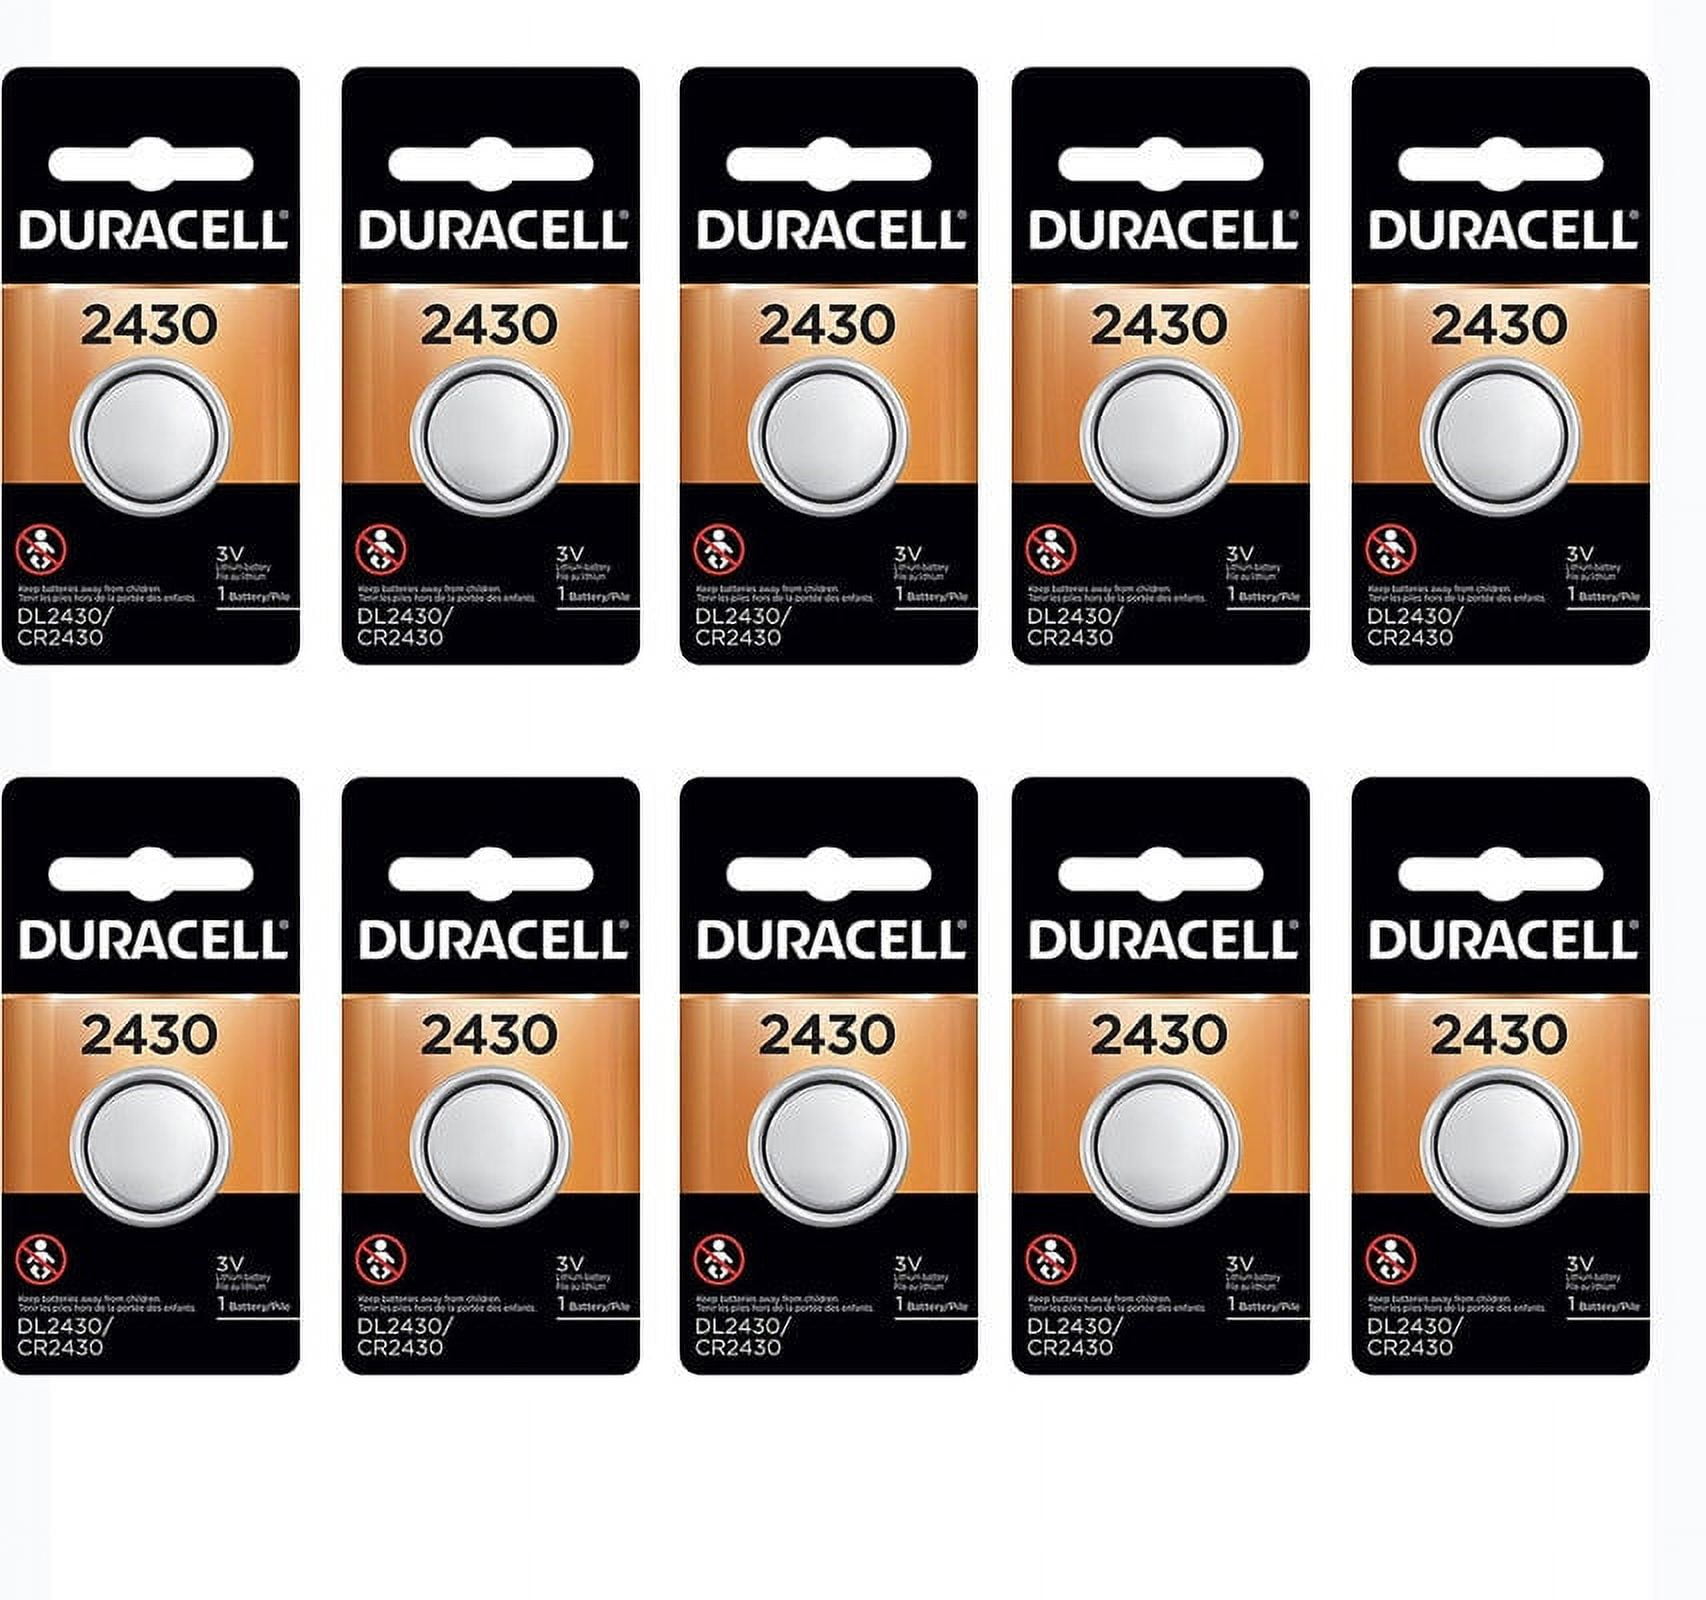 Duracell 2430 3V Lithium Battery, 1 Count Pack, Lithium Coin Battery for  Medical and Fitness Devices, Watches, and more, CR Lithium 3 Volt Cell